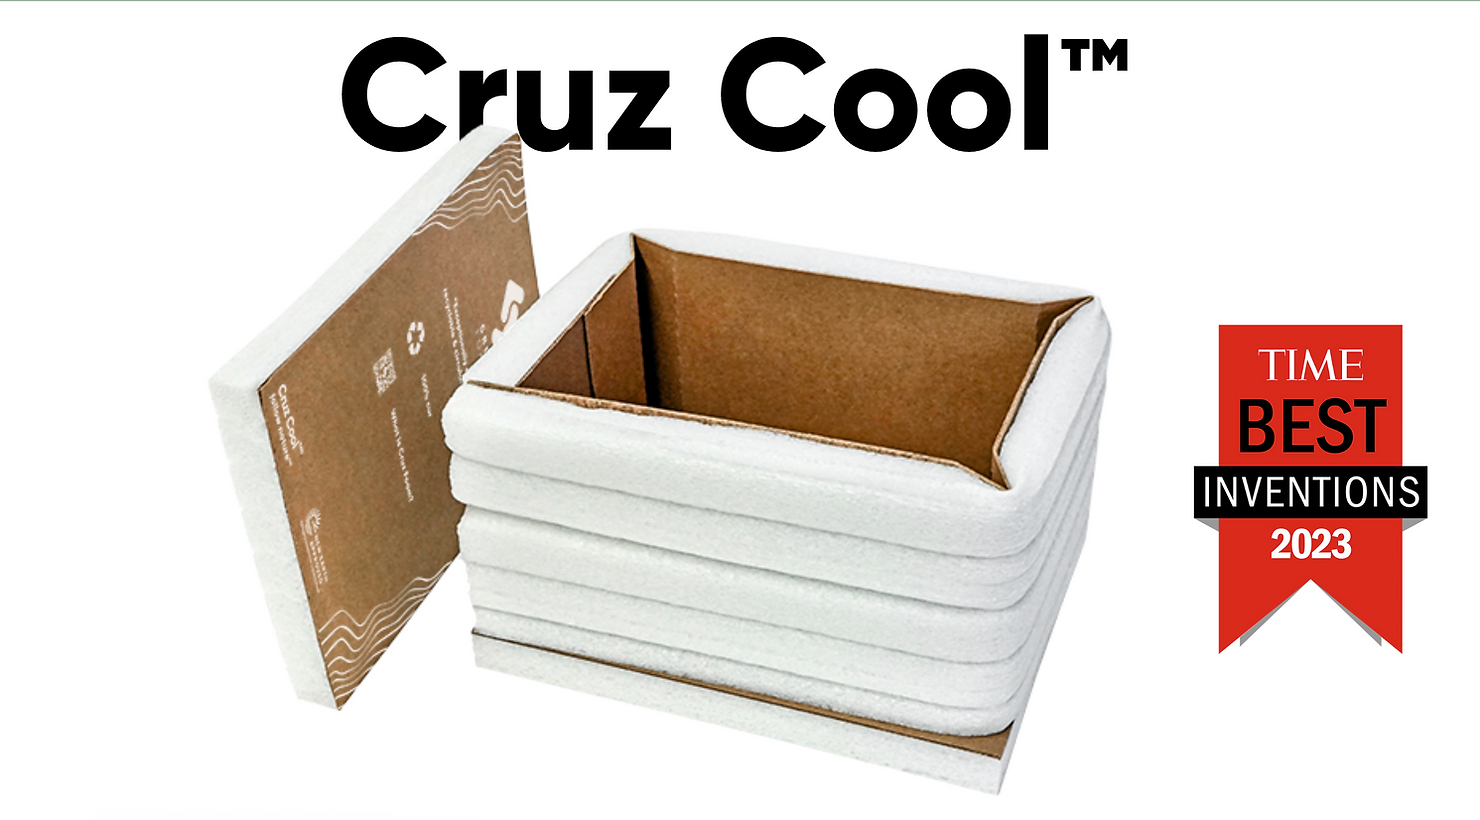 A box lid and a box with special white packaging material on the outside with Cruz Cool on the top in letters and a Time Best Inventions 2023 banner on the side